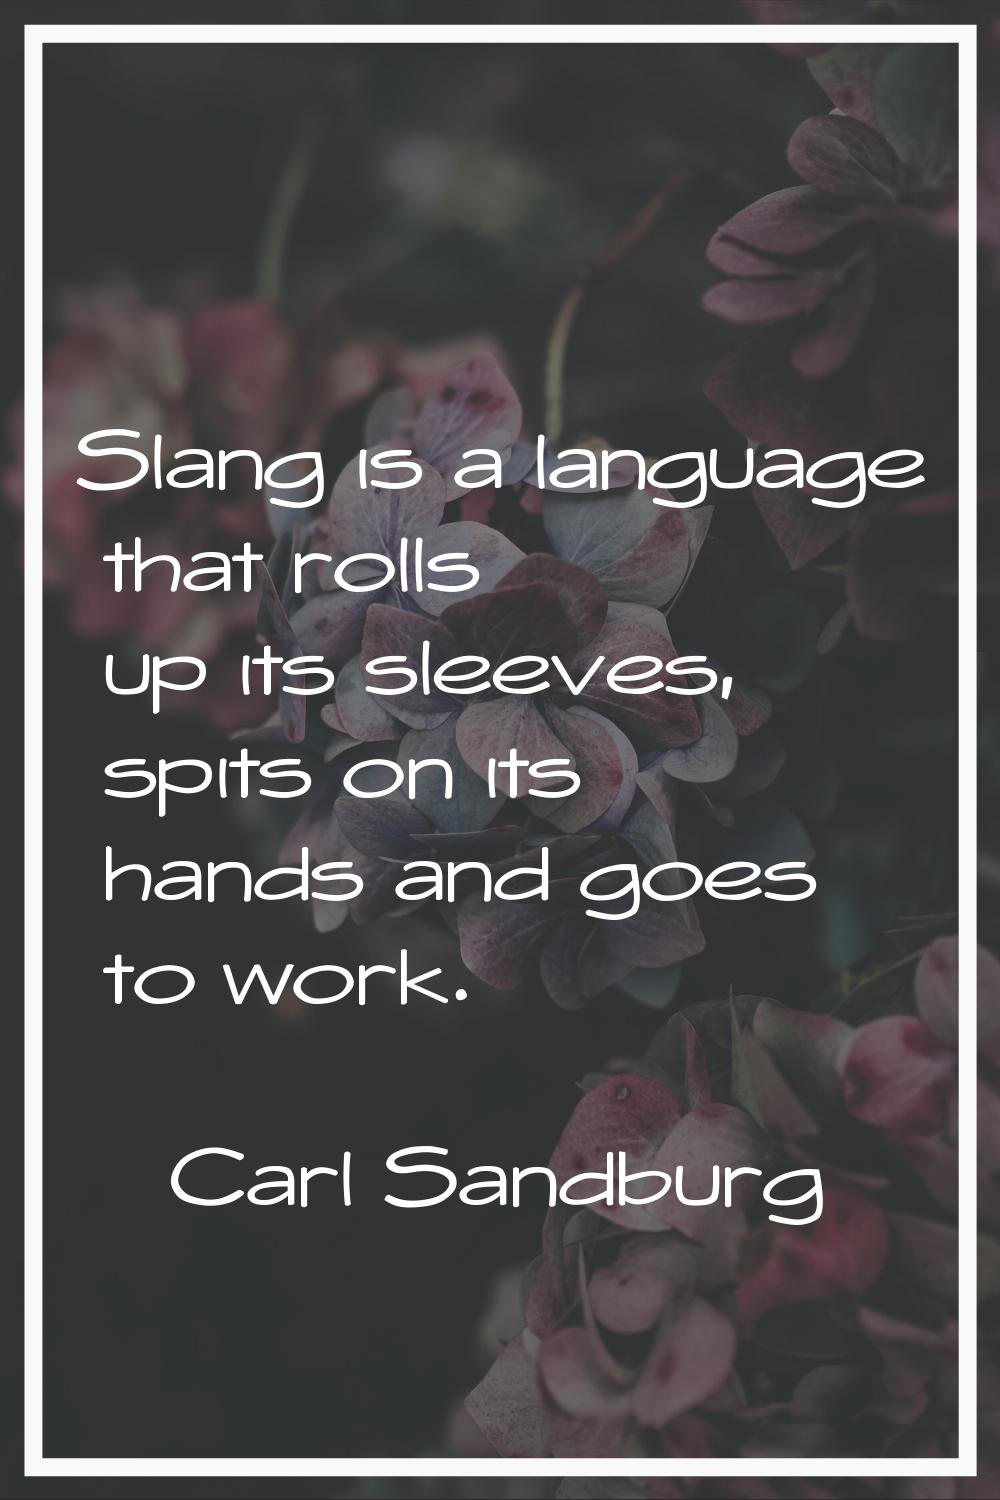 Slang is a language that rolls up its sleeves, spits on its hands and goes to work.